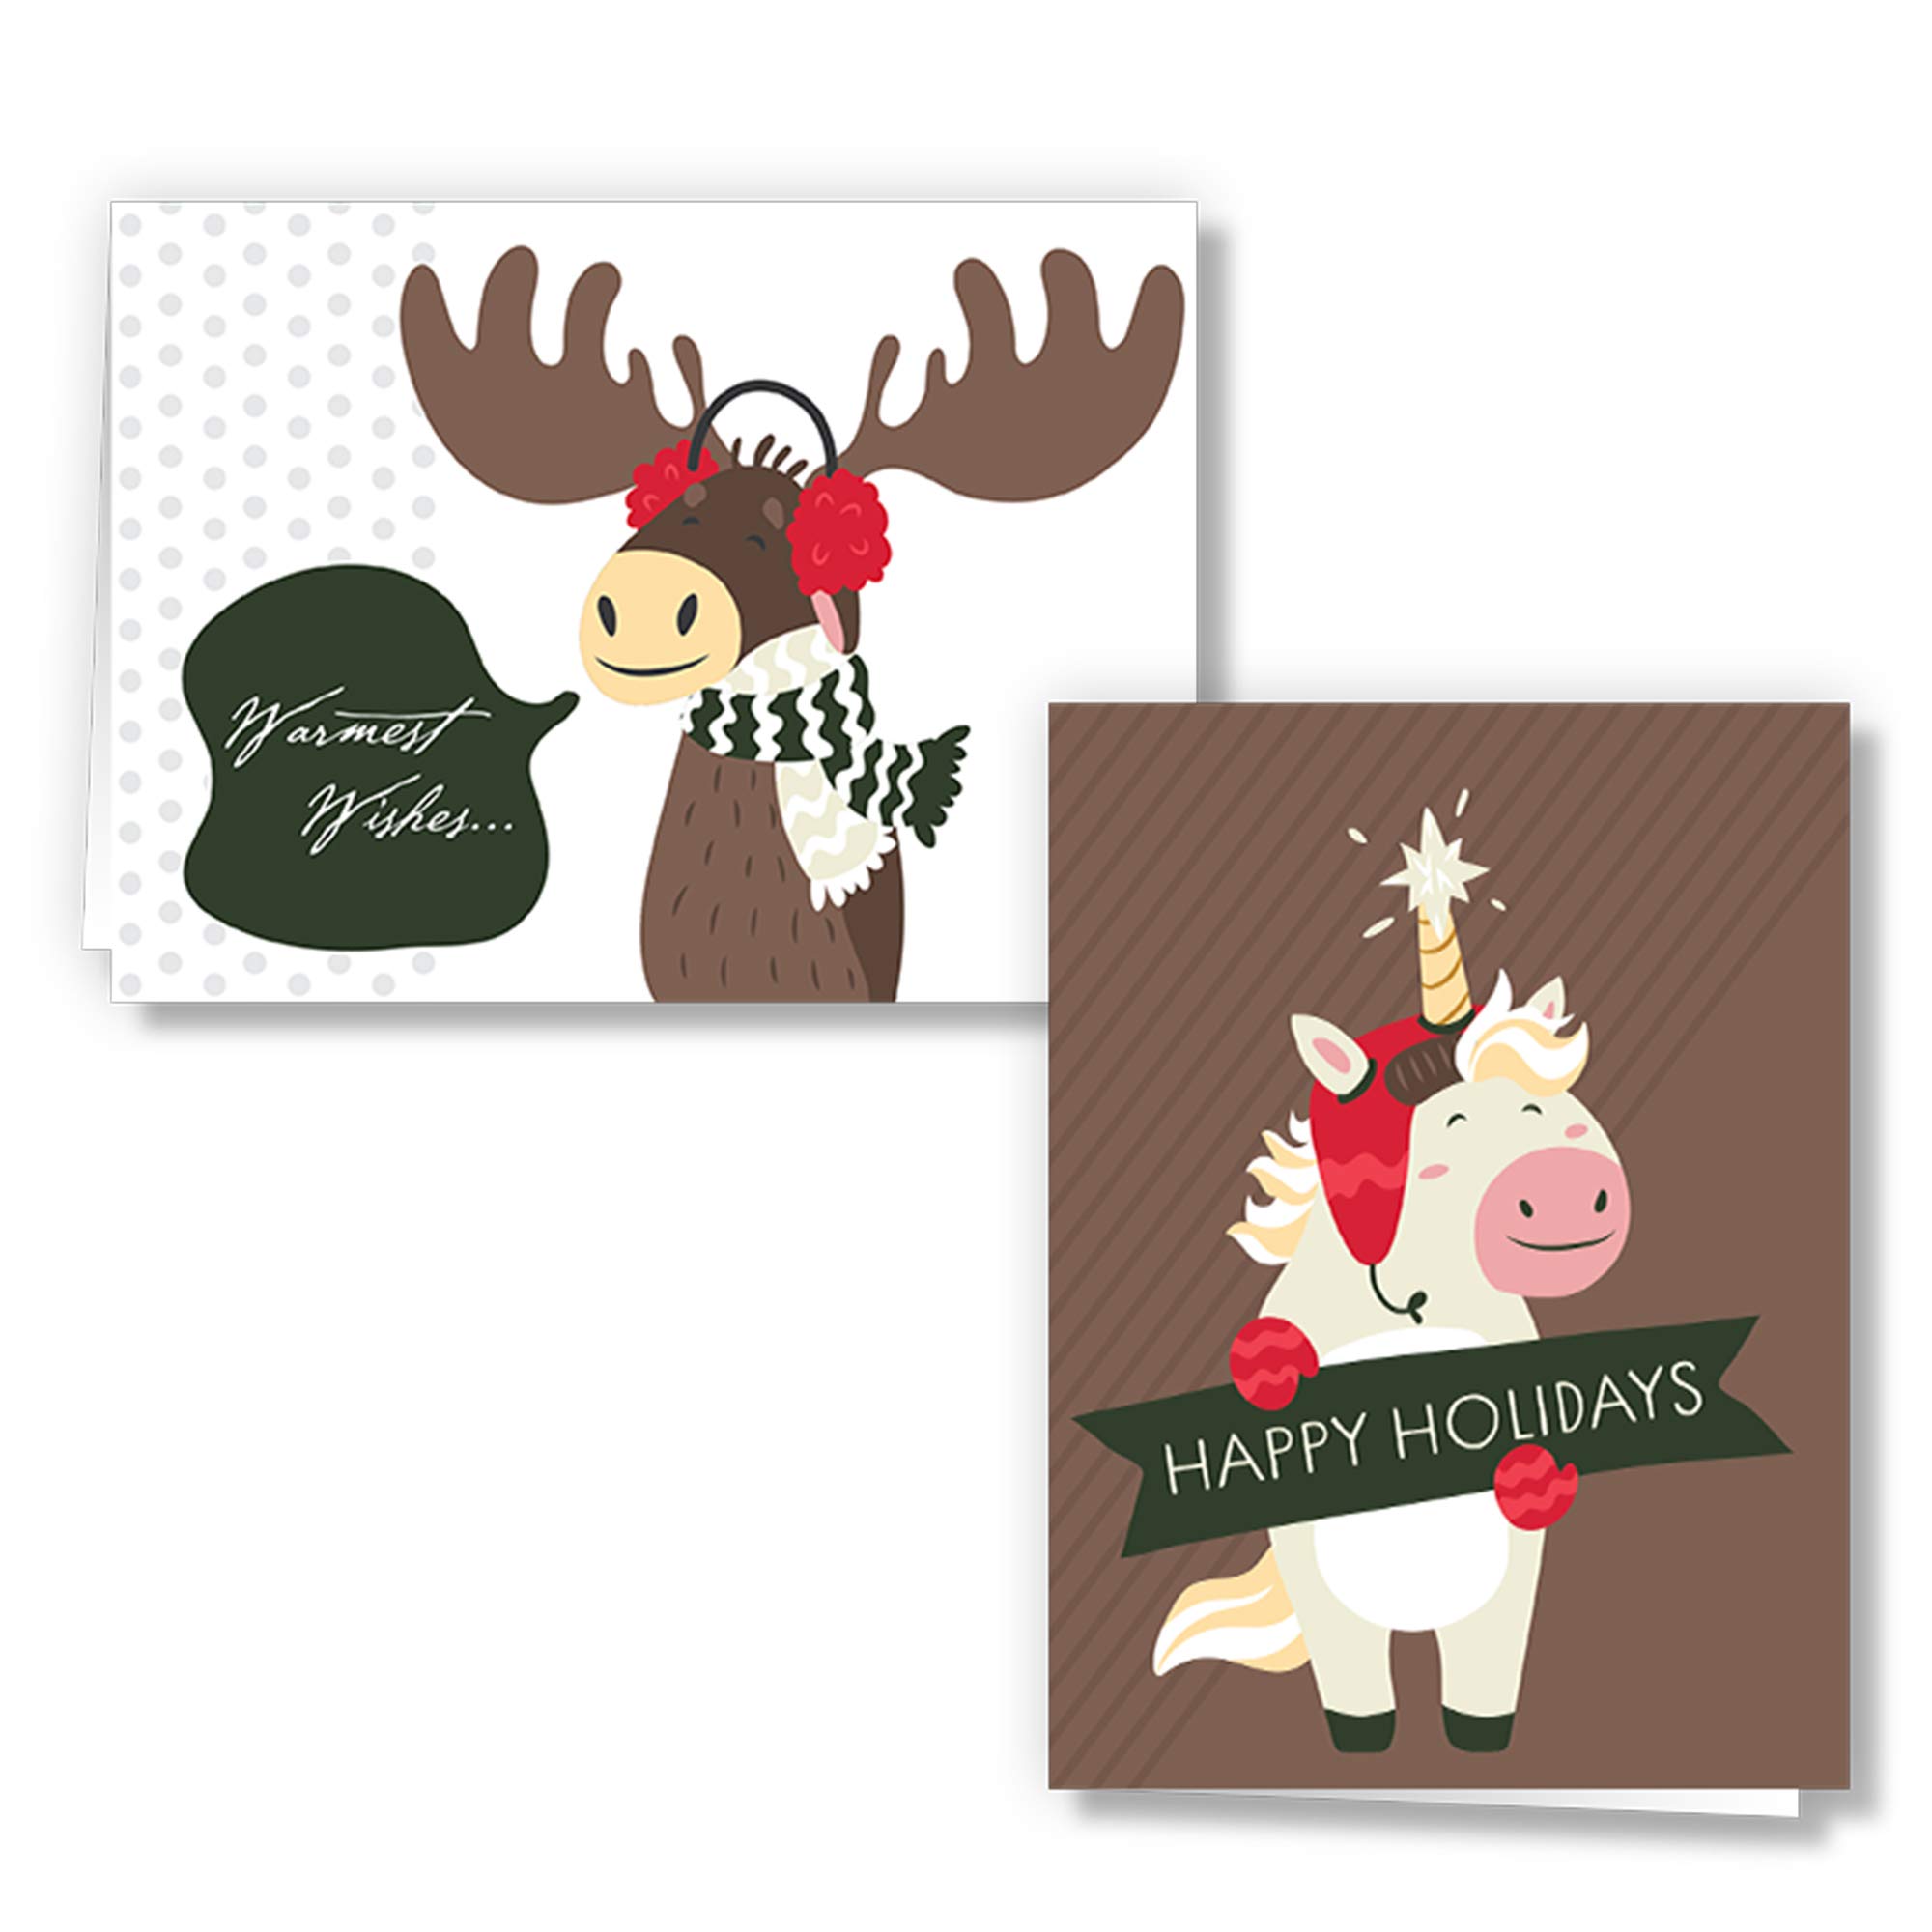 72 Piece Cute Animal Wintertime Greeting Cards Collection with 6 Unique Festive Designs & Envelopes for Winter Christmas Season, Holiday Gift Giving, Xmas Gifts Cards.